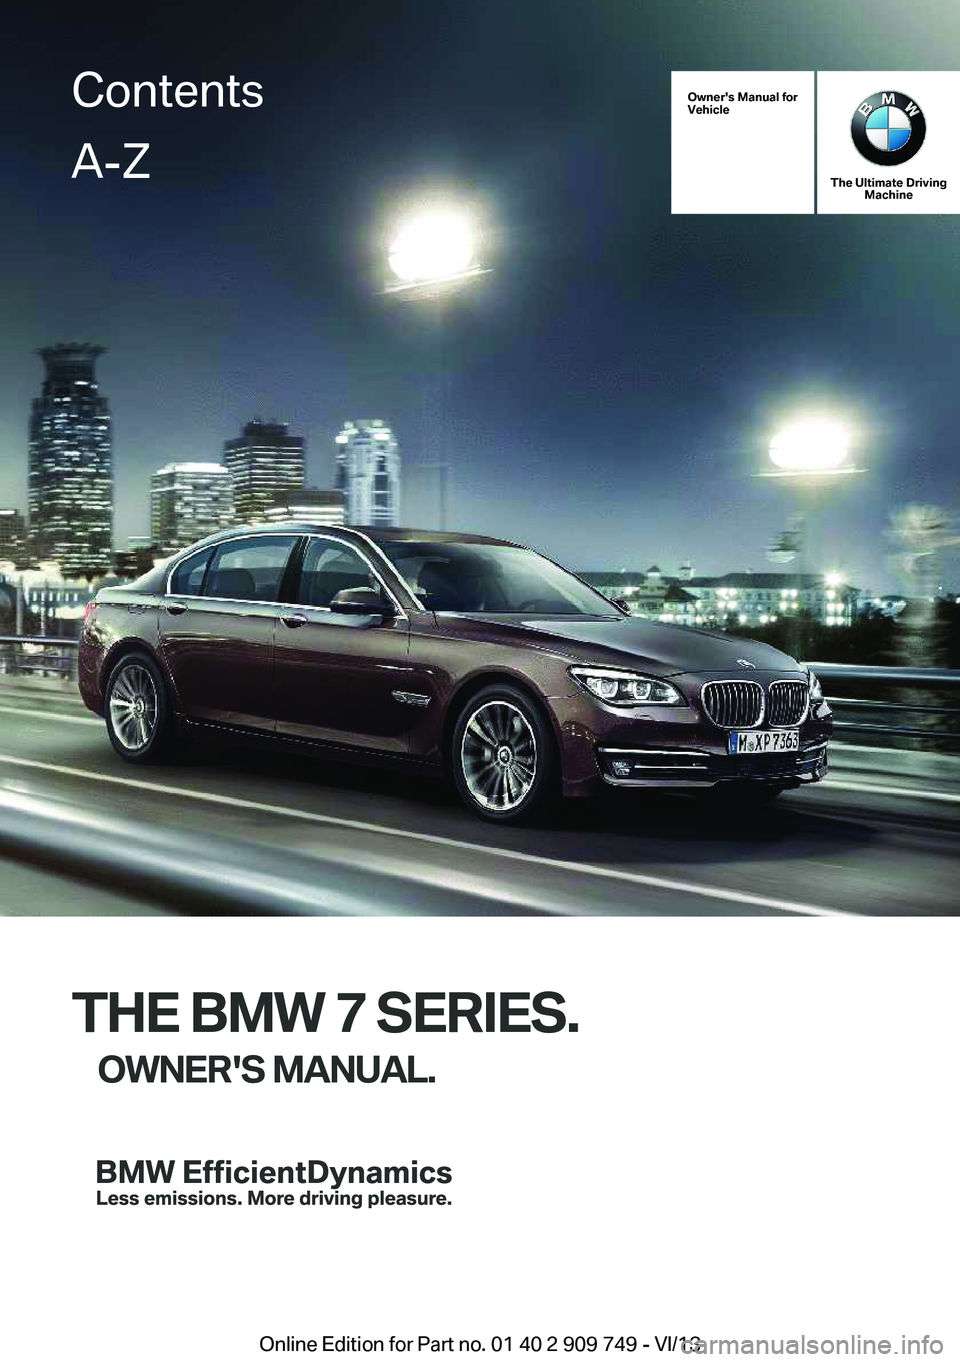 BMW 760LI 2014  Owners Manual Owner's Manual for
Vehicle
The Ultimate Driving Machine
THE BMW 7 SERIES.
OWNER'S MANUAL.
ContentsA-Z
Online Edition for Part no. 01 40 2 909 749 - VI/13   